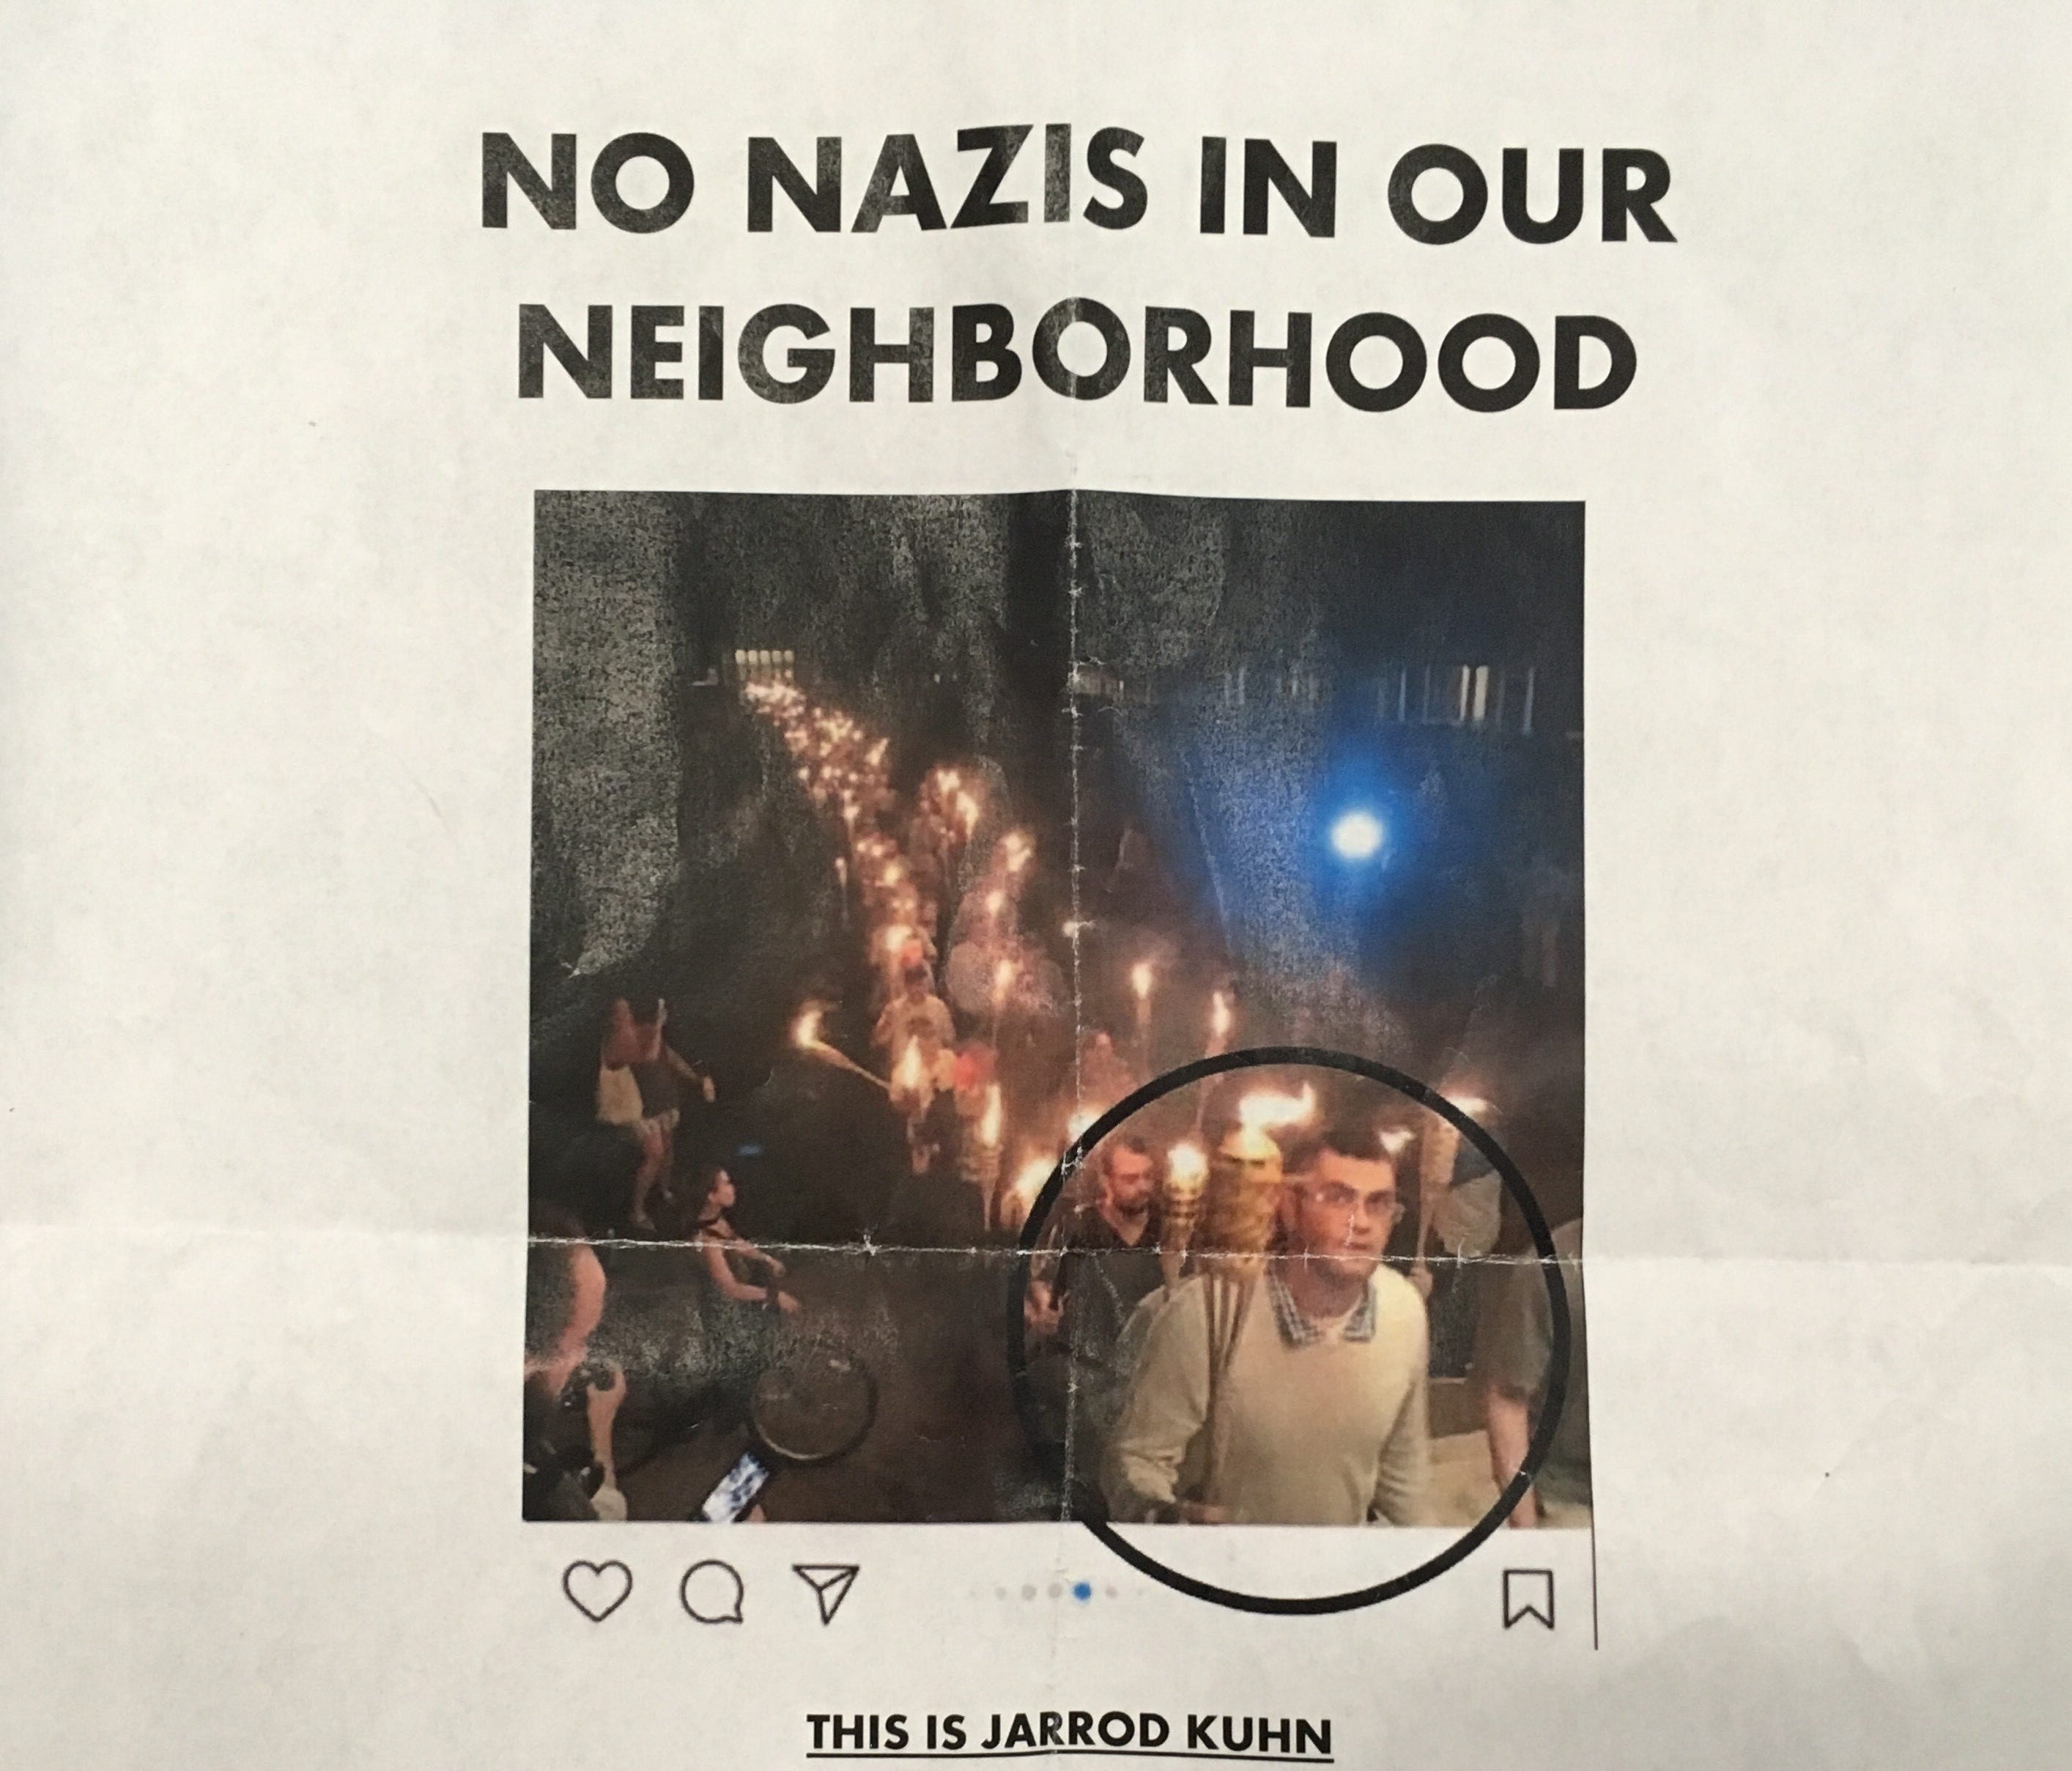 This flyer was hung around the village of Honeoye Falls, identifying Jarrod Kuhn as a 